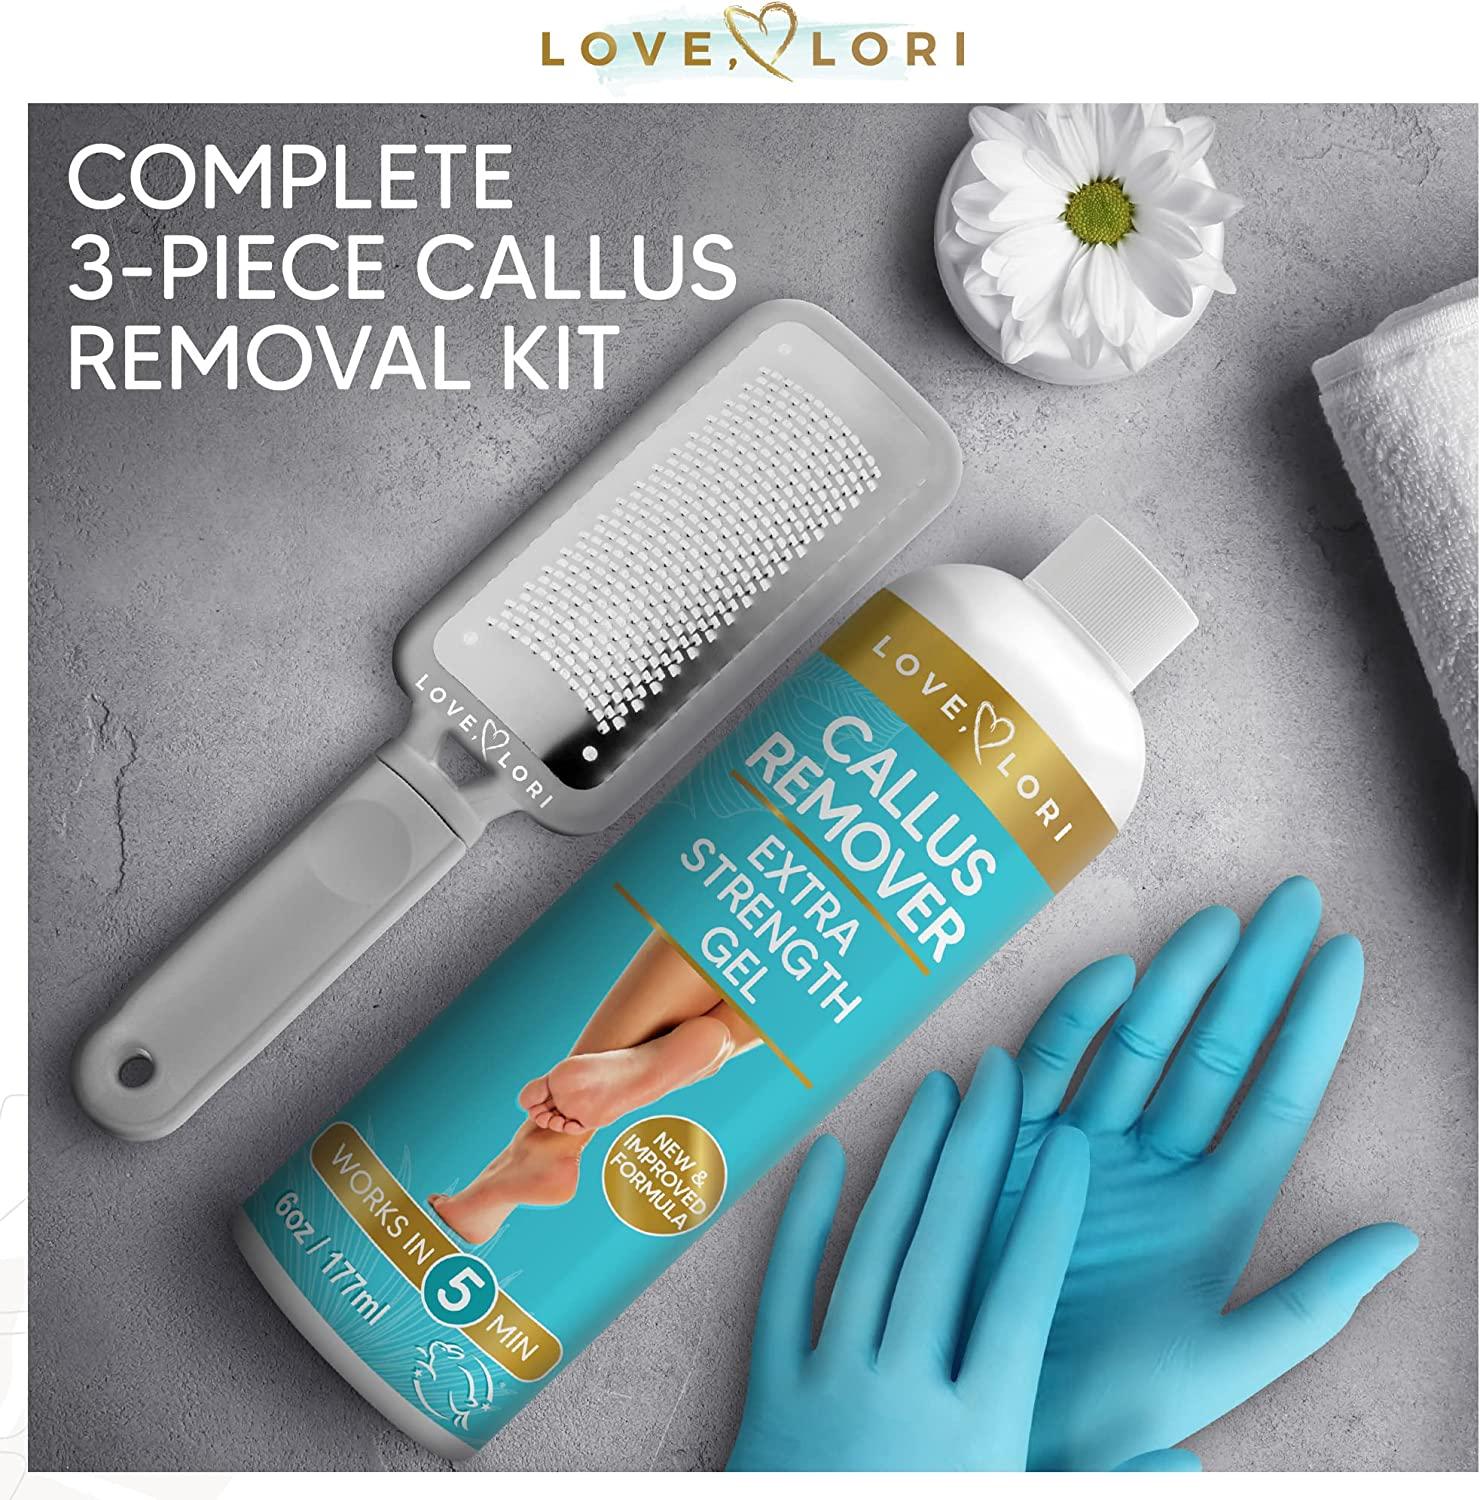 Foot Callus Remover Gel (6oz) - Calloused Feet Remover for Pedicure  Supplies & Kit - Foot Peel Callus Shaver for Feet by Love Lori